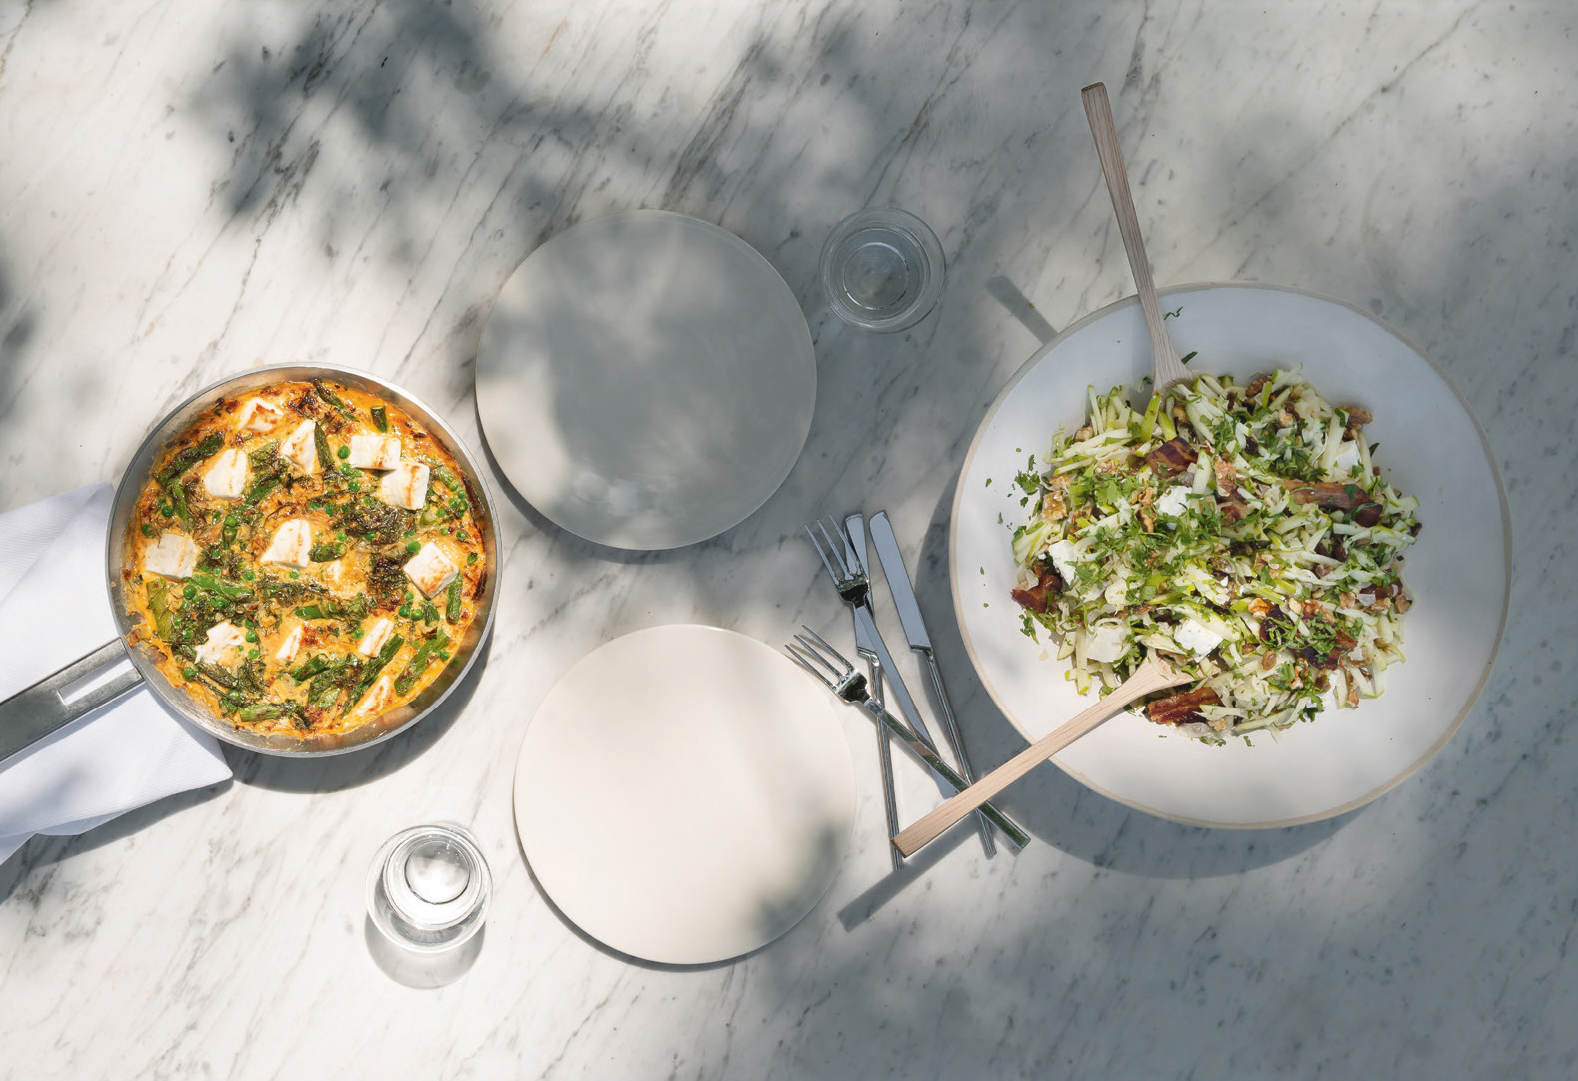 Asparagus, pea and herb frittata and fresh apple,fennel and feta salad, from a selection of spring recipes from Home Farm Cooking